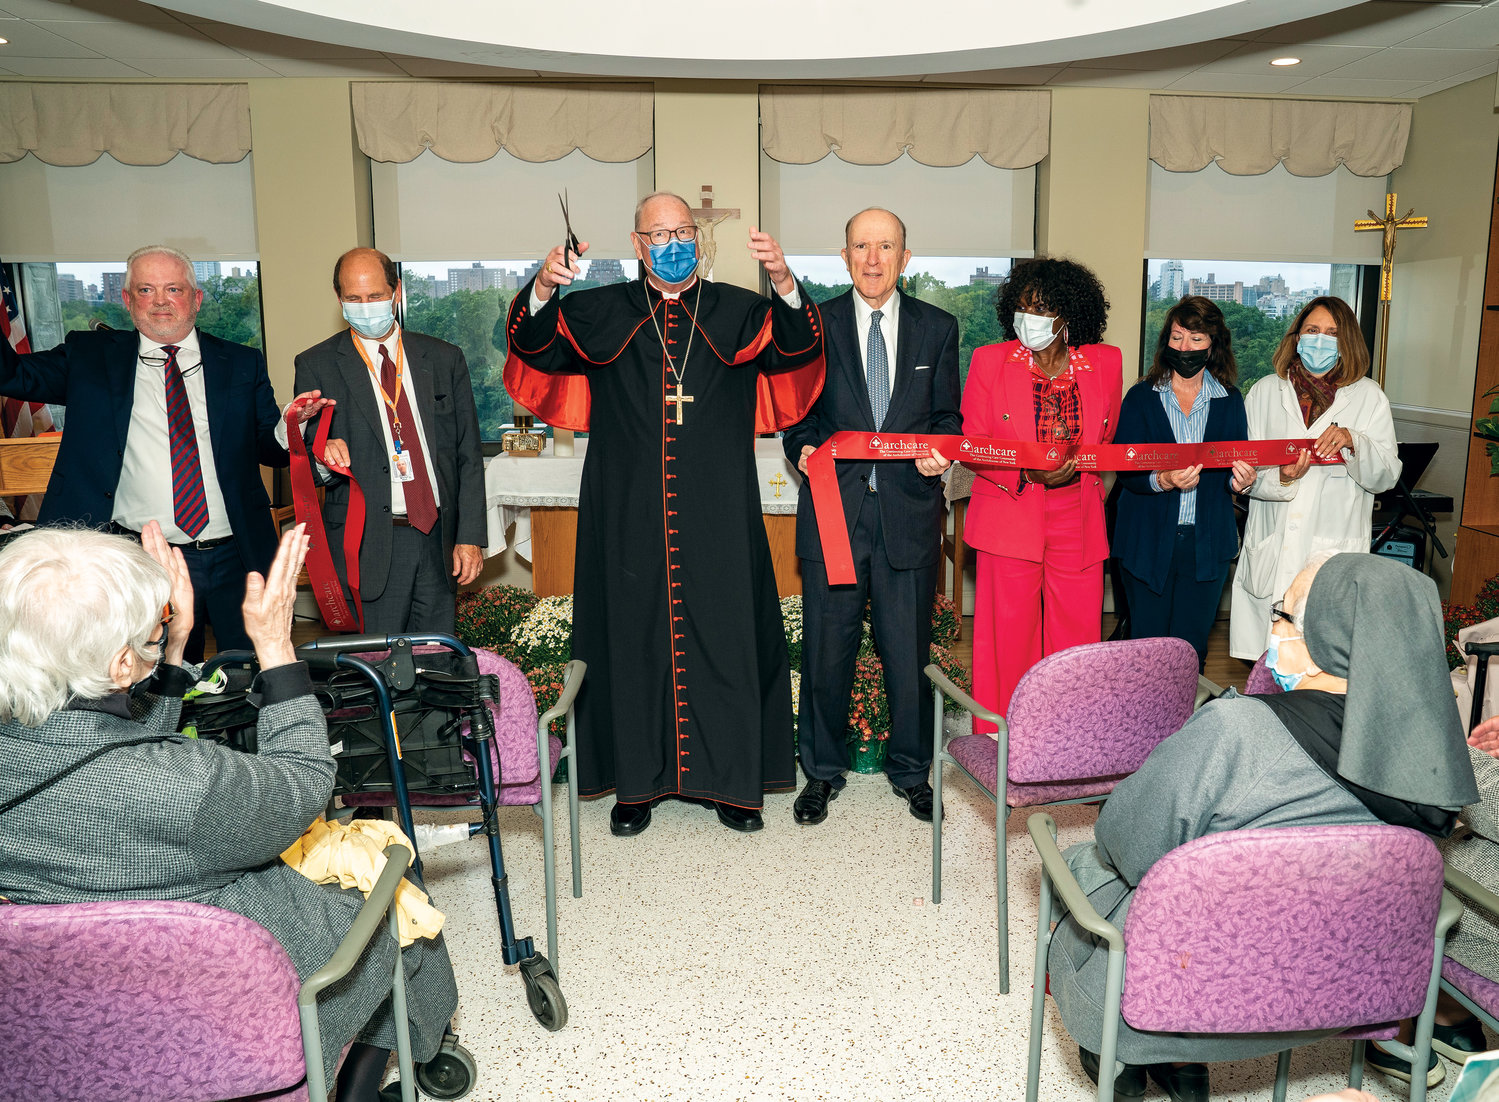 Cardinal Dolan cuts the ribbon at the grand opening of ArchCare at Mother Cabrini Hospital, formerly known as the Specialty Hospital for Children, Oct. 4 in Manhattan. With the cardinal, from left, are Scott LaRue, president and CEO of ArchCare; Mitchell Marsh, senior vice president, Residential Services of ArchCare facilities; Francis J. Serbaroli, chairman, ArchCare board of trustees; Rosalie Bernard, executive director, ArchCare at Terence Cardinal Cooke Health Care Center; Annmarie Covone, executive vice president/CFO of ArchCare; Dr. Vicki-Jo Deutsch, medical director, ArchCare at Mother Cabrini Hospital.